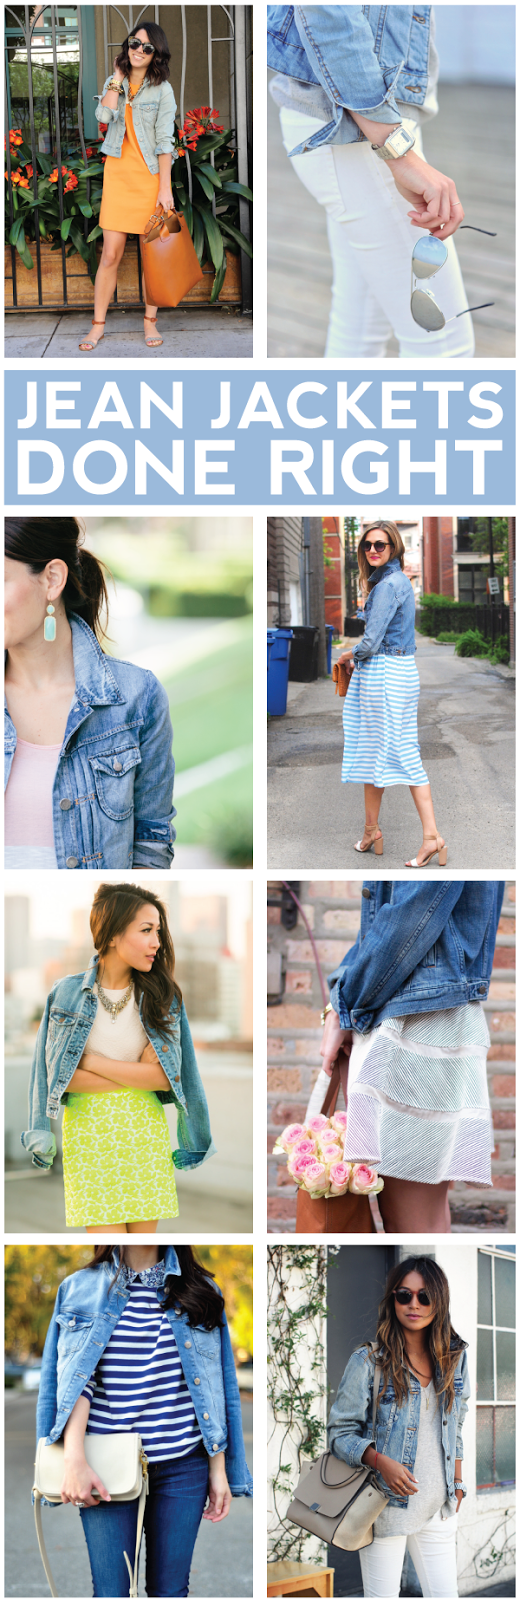 jean jackets done right.